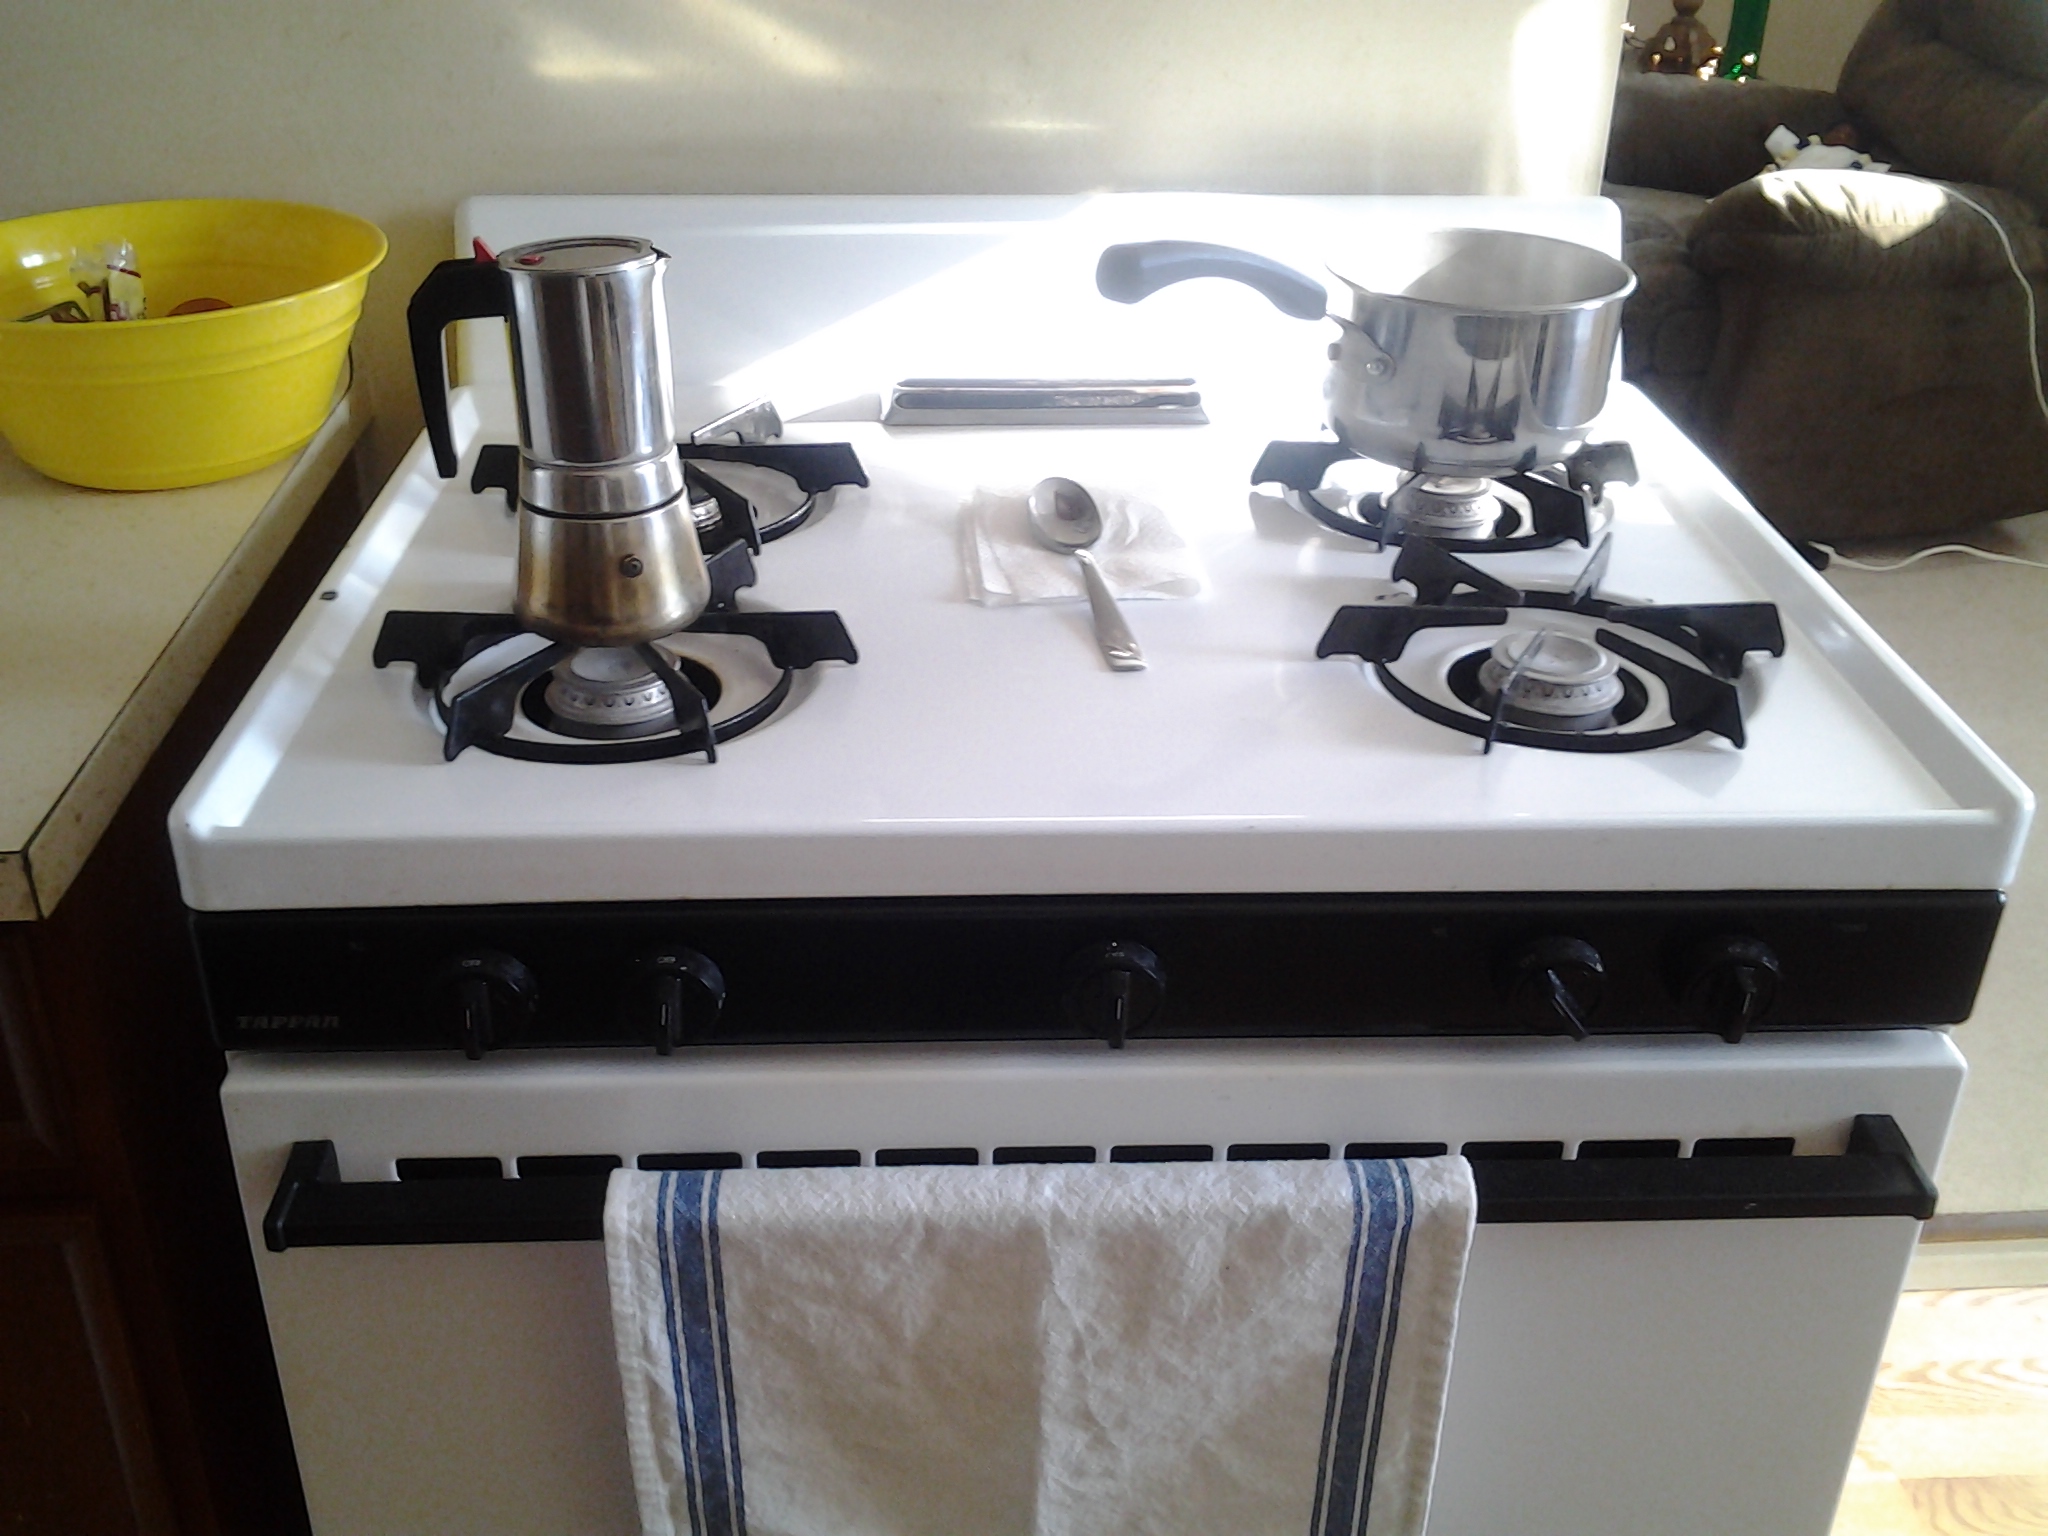 a stove top oven with two burners, a tea kettle and a towel hanging on it